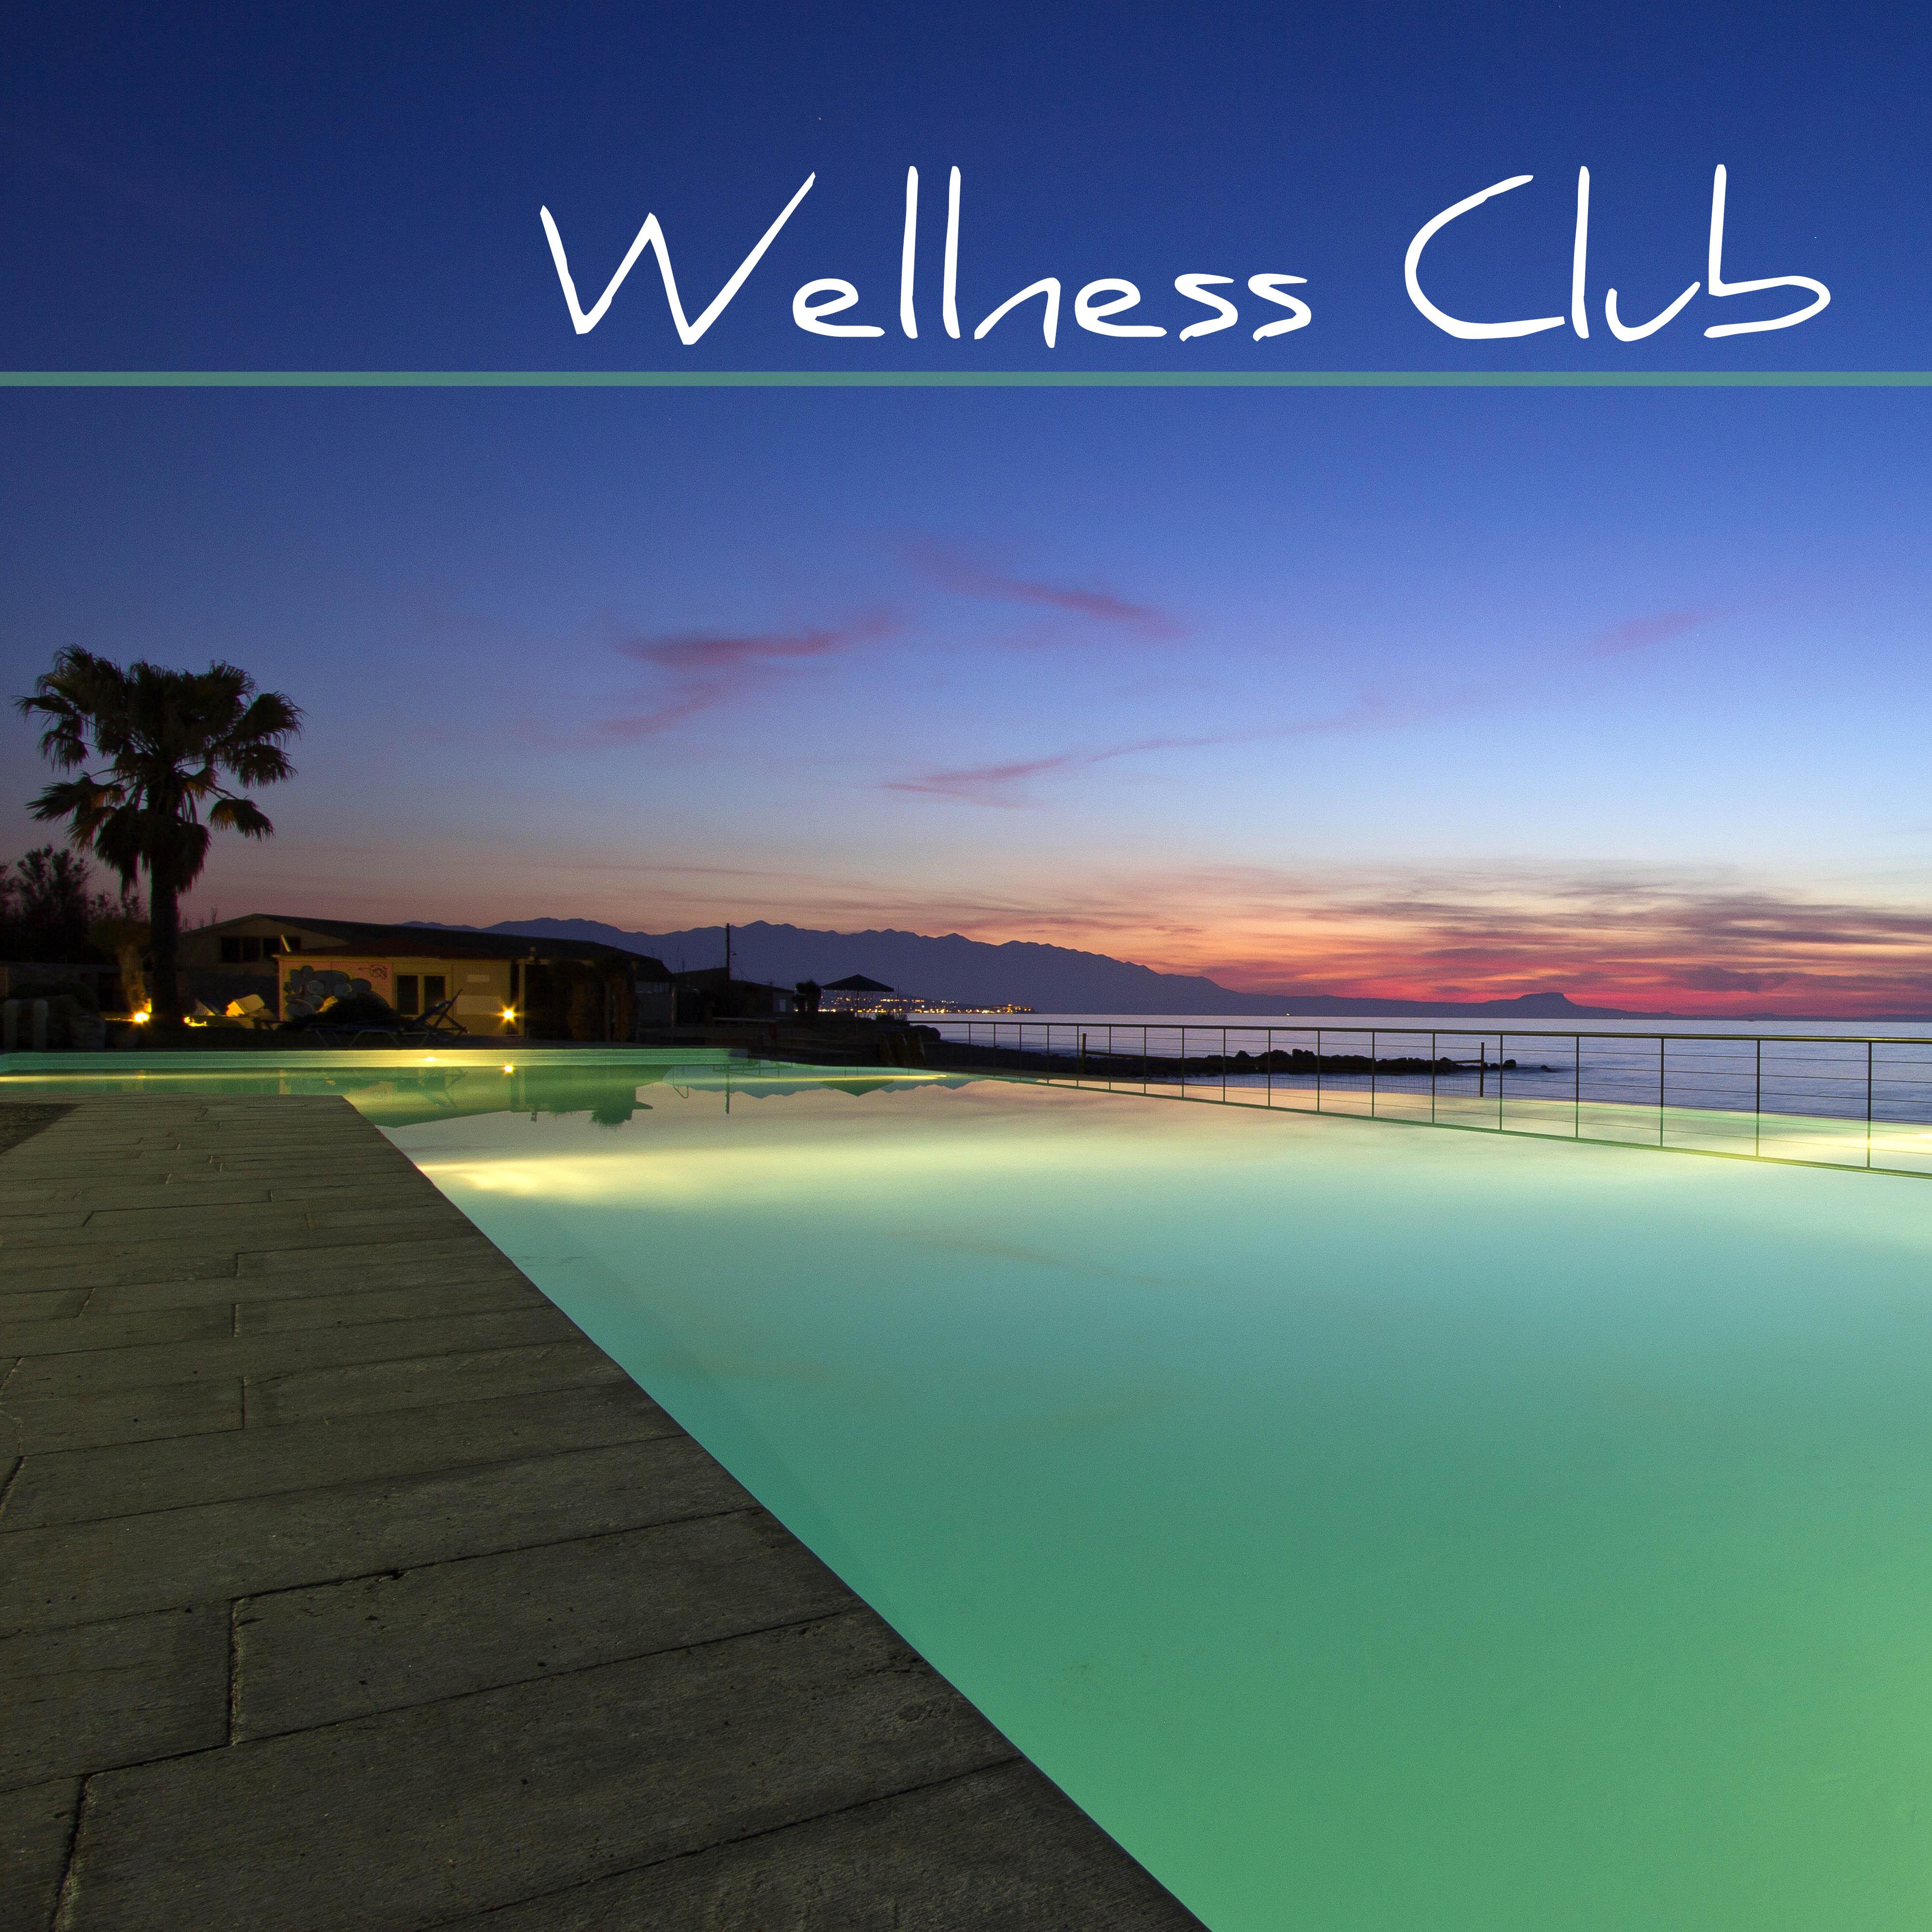 Wellness Club - Spa Background Music for Relaxation